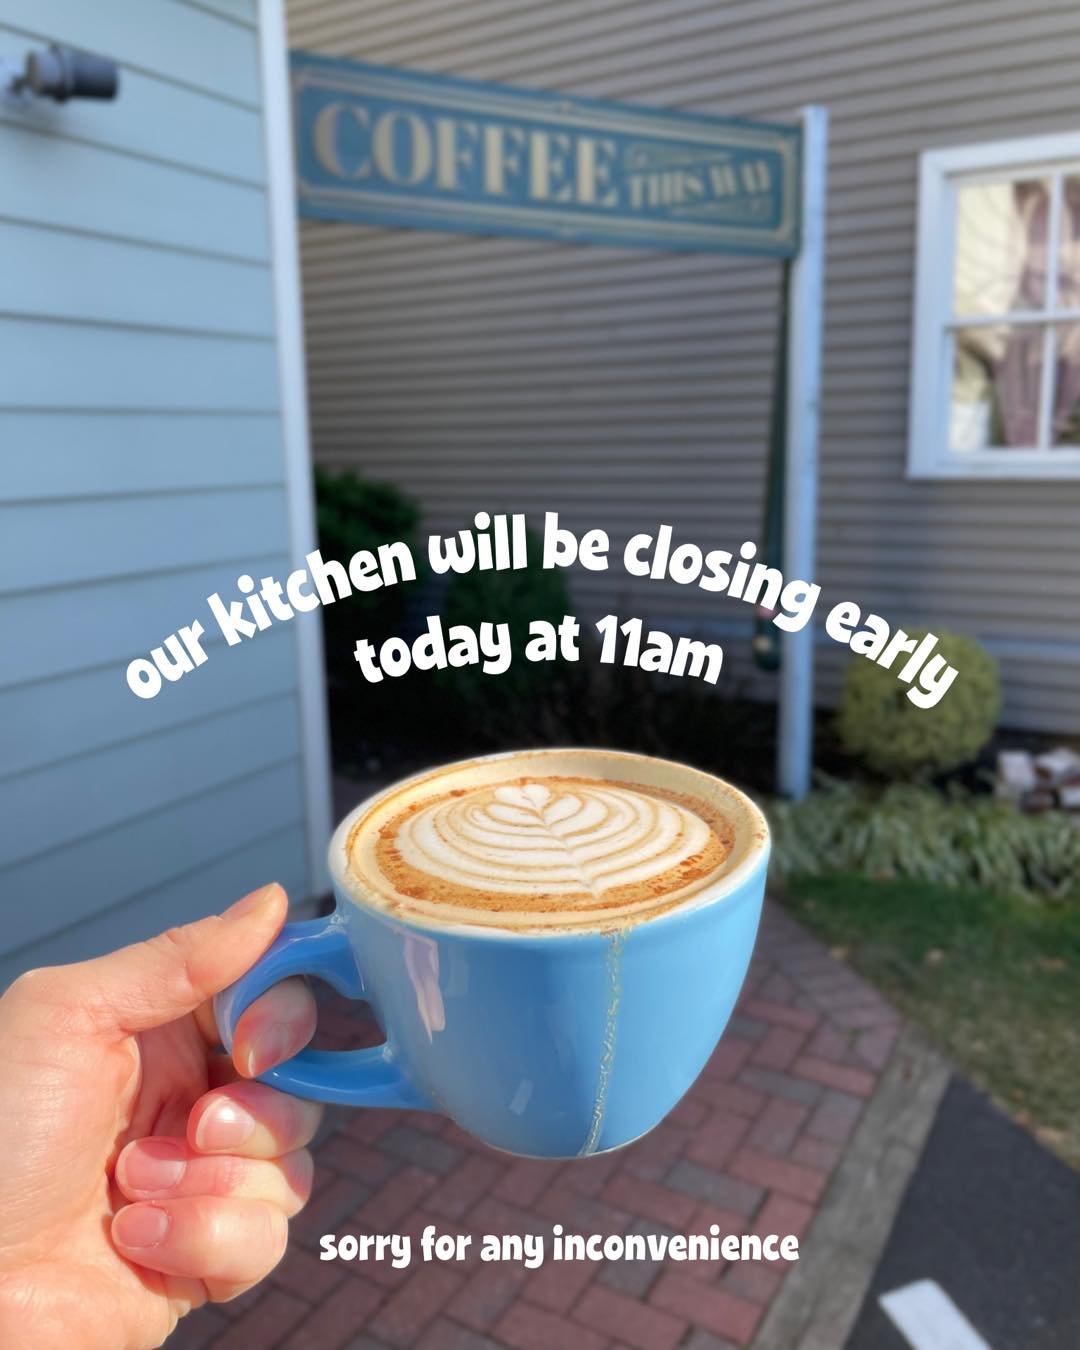 sorry for any inconvenience, but our kitchen will be closing early today at 11am.

but have no fear&mdash;baked goods are still here all day! that includes scones, muffins, and cookies. and our fabulous coffees and beverages, too.

we return to regul